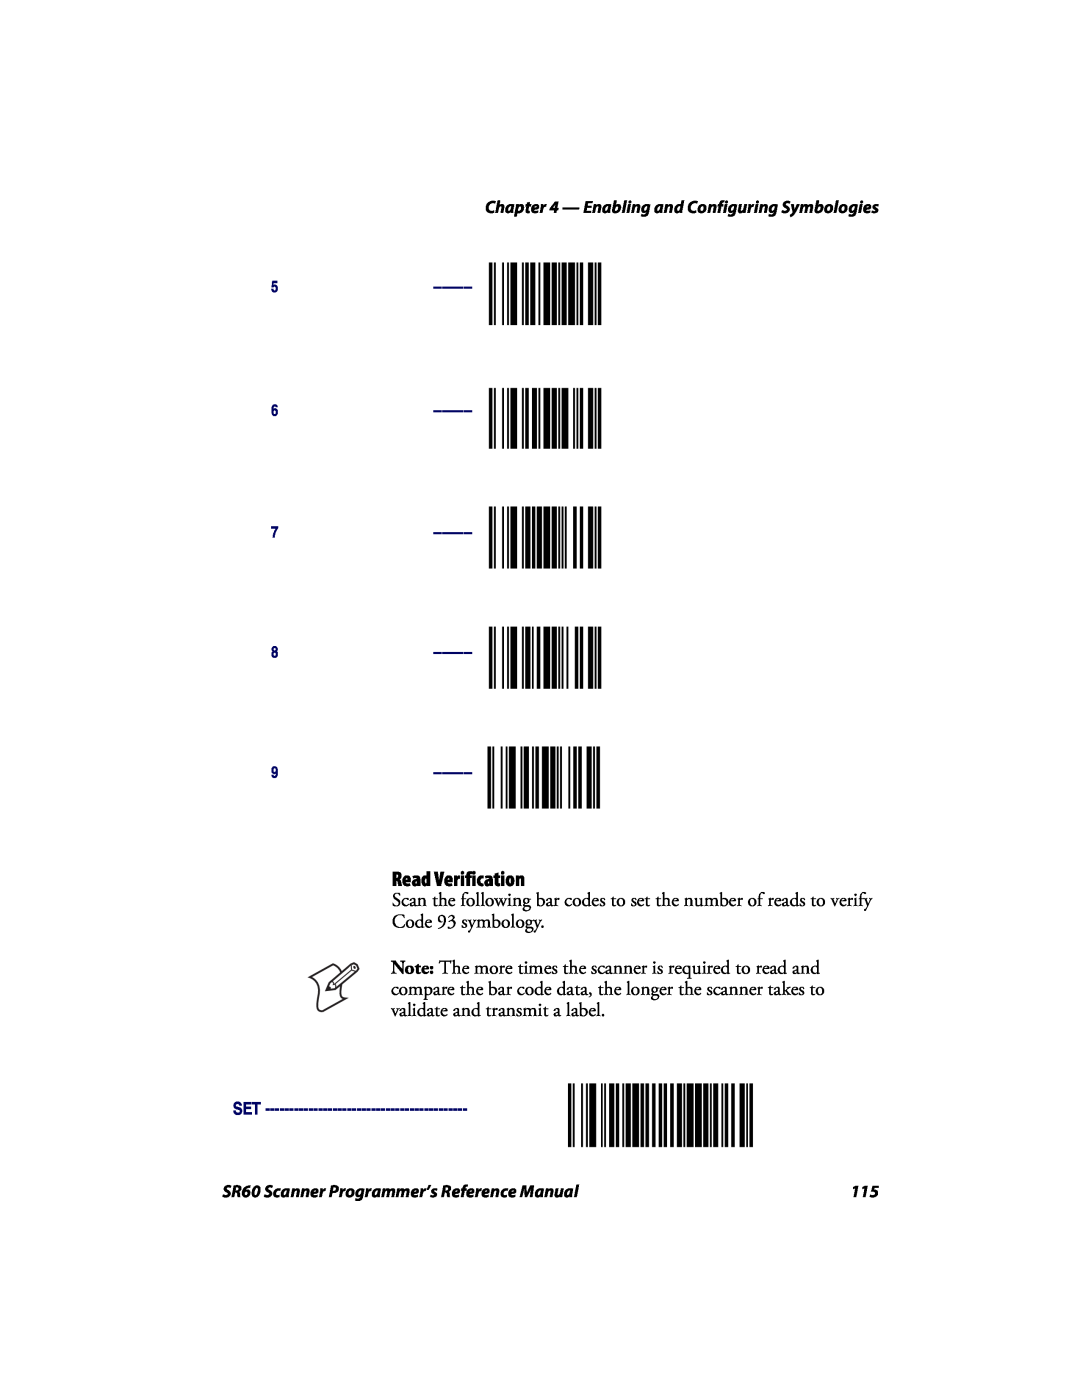 Intermec SR60 Read Verification, Scan the following bar codes to set the number of reads to verify, Code 93 symbology 